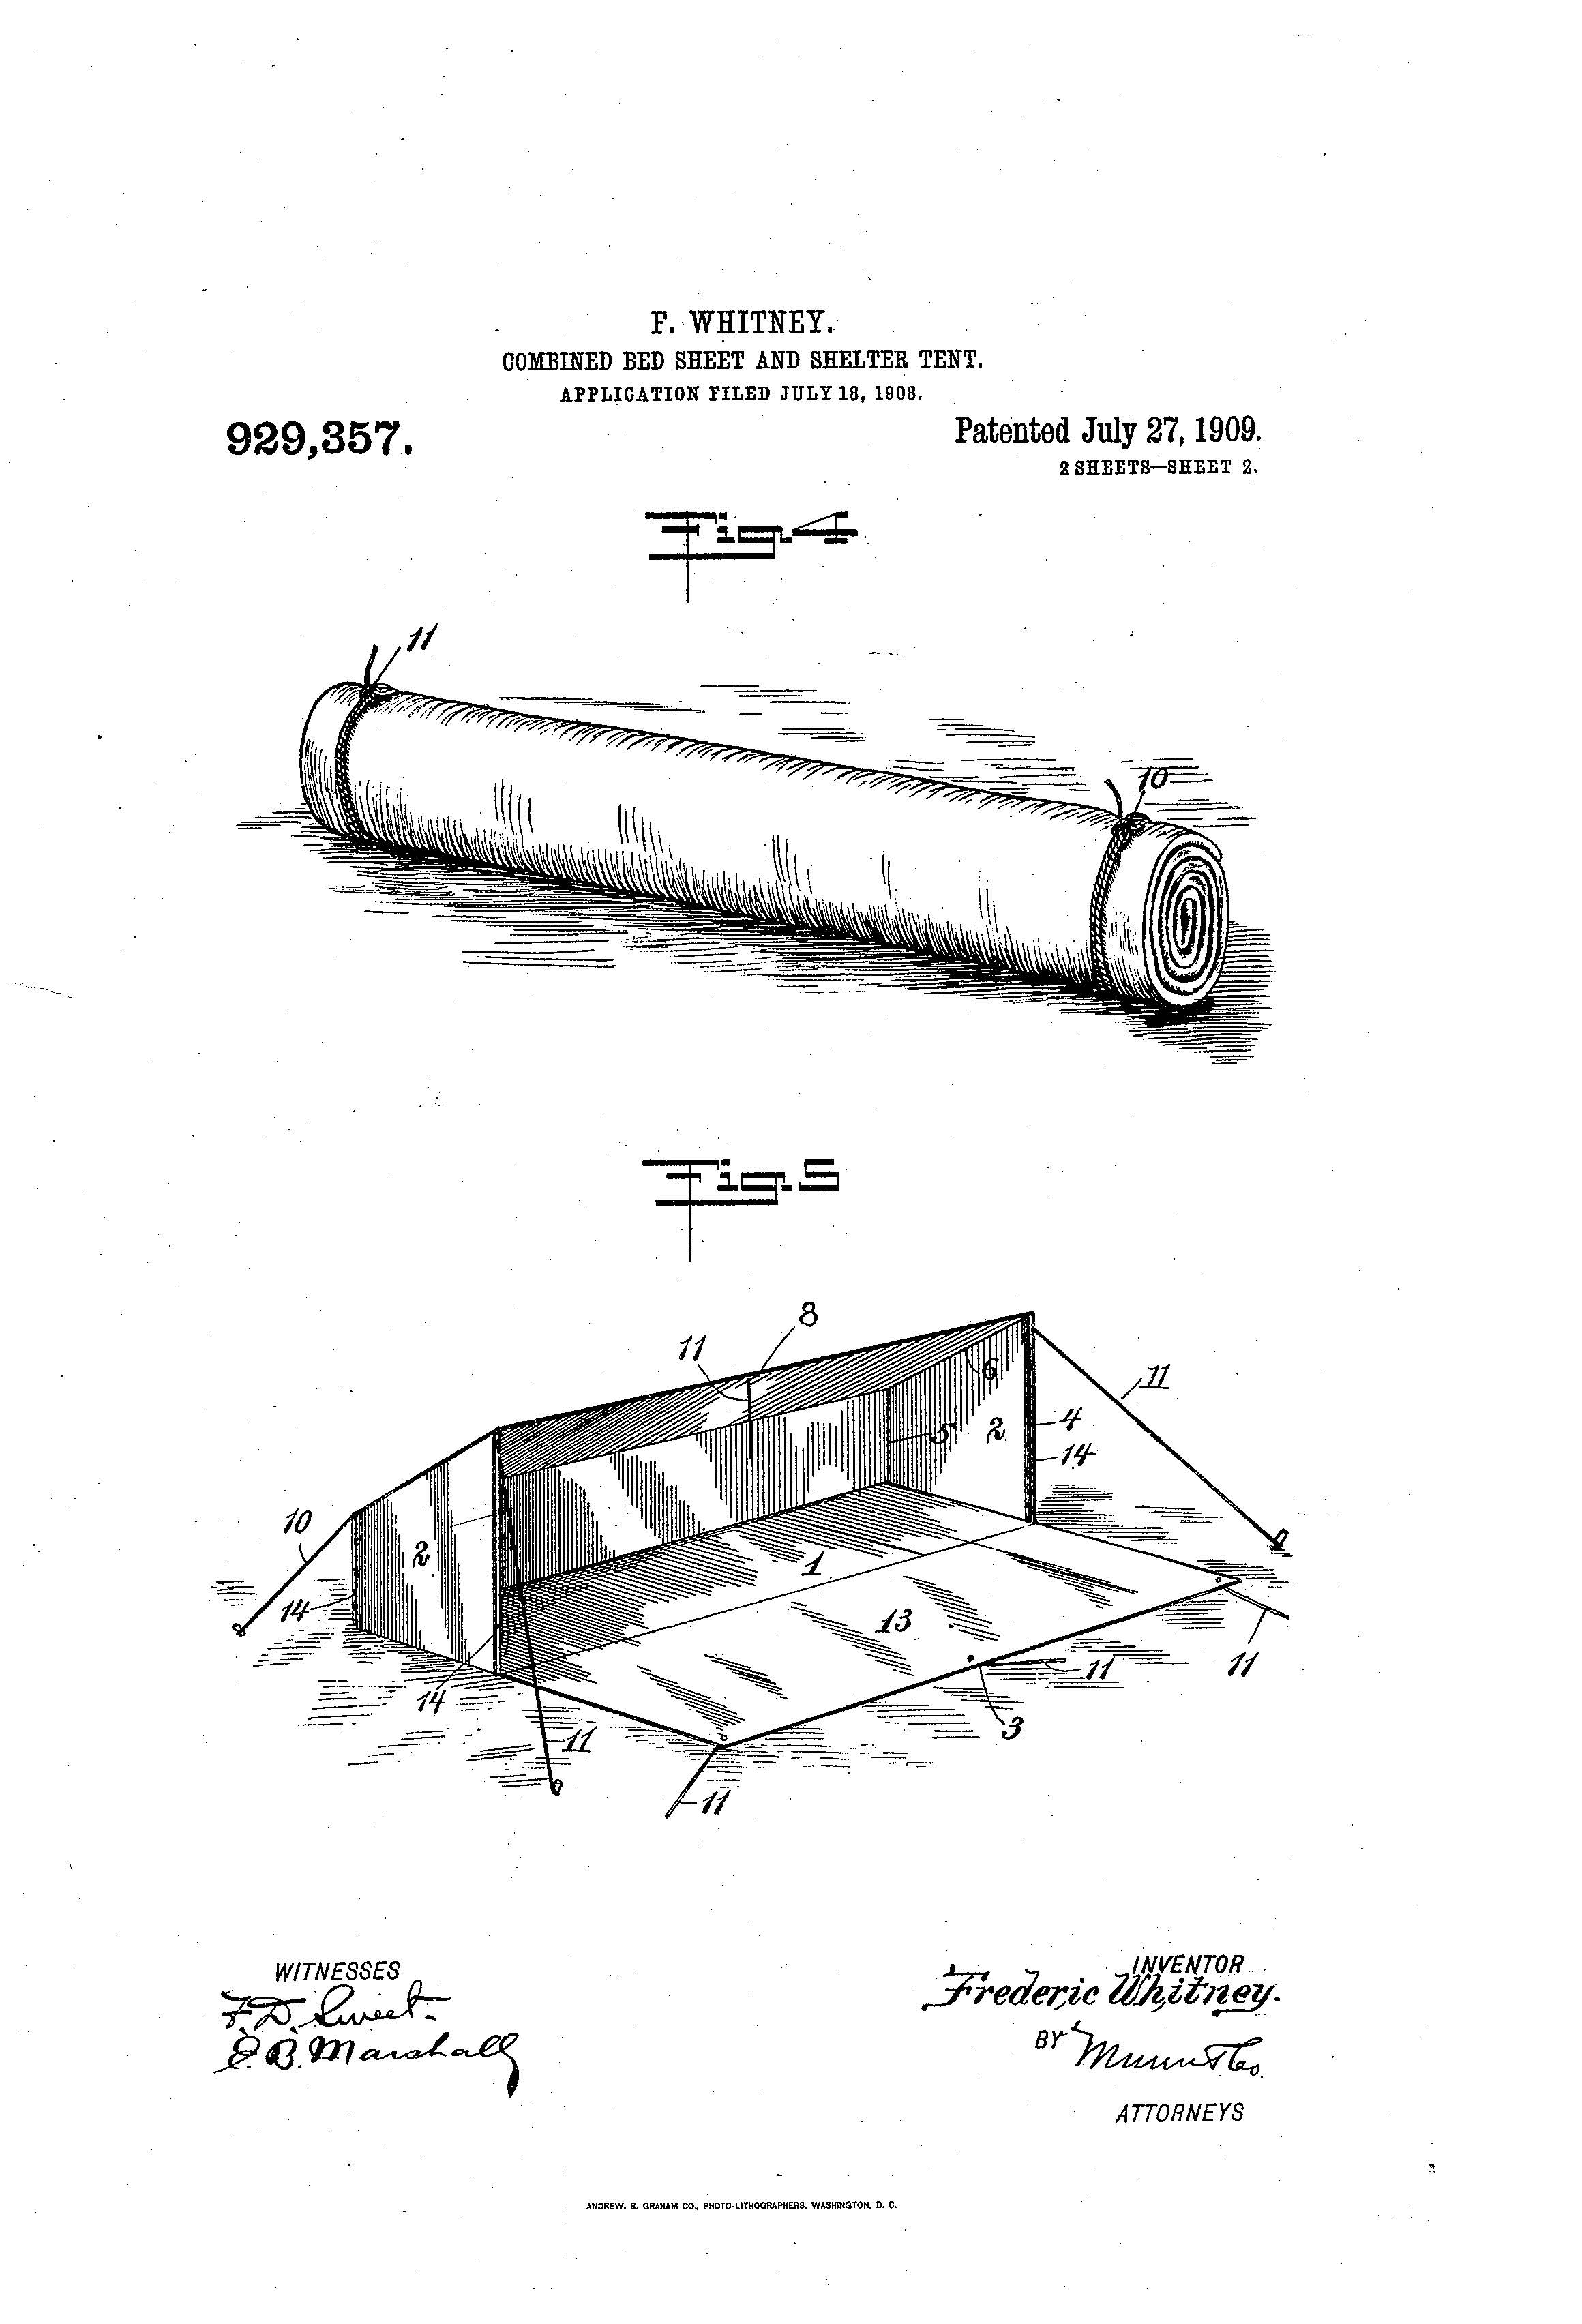 Patent-Illustration-Combined-Bed-Sheet-and-Shelter-Tent_Page_2